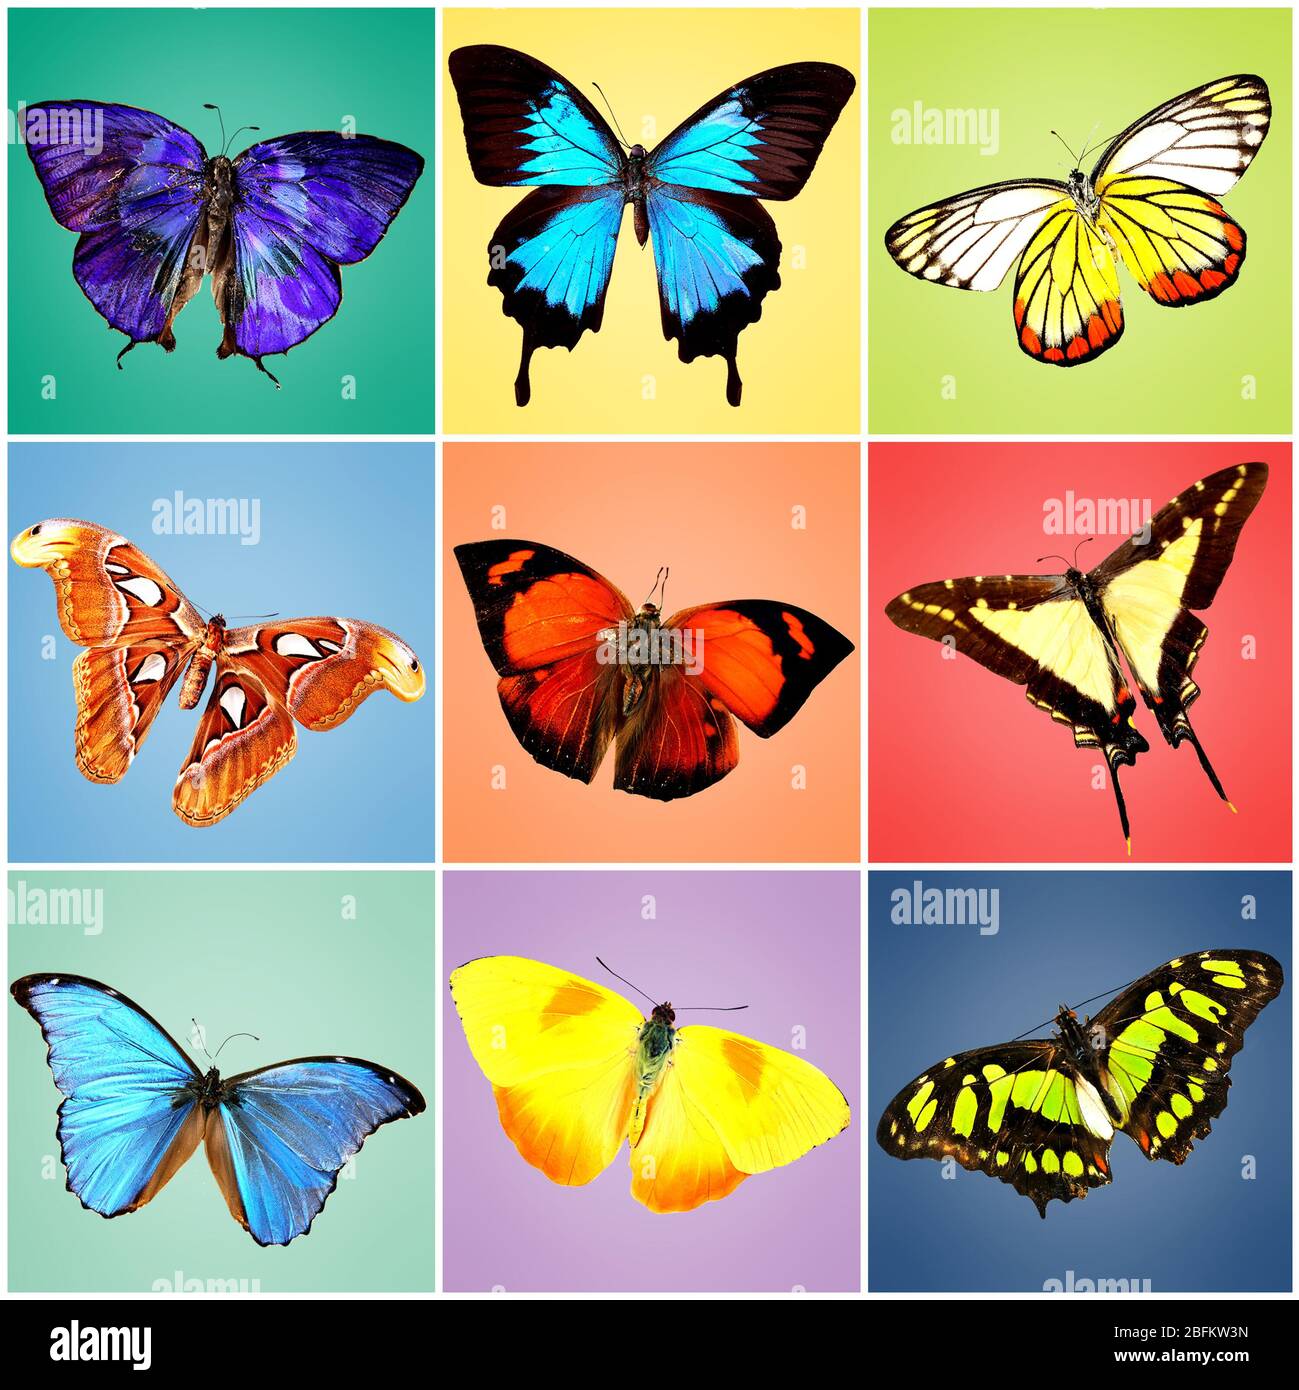 Butterflies collection on bright background Stock Photo